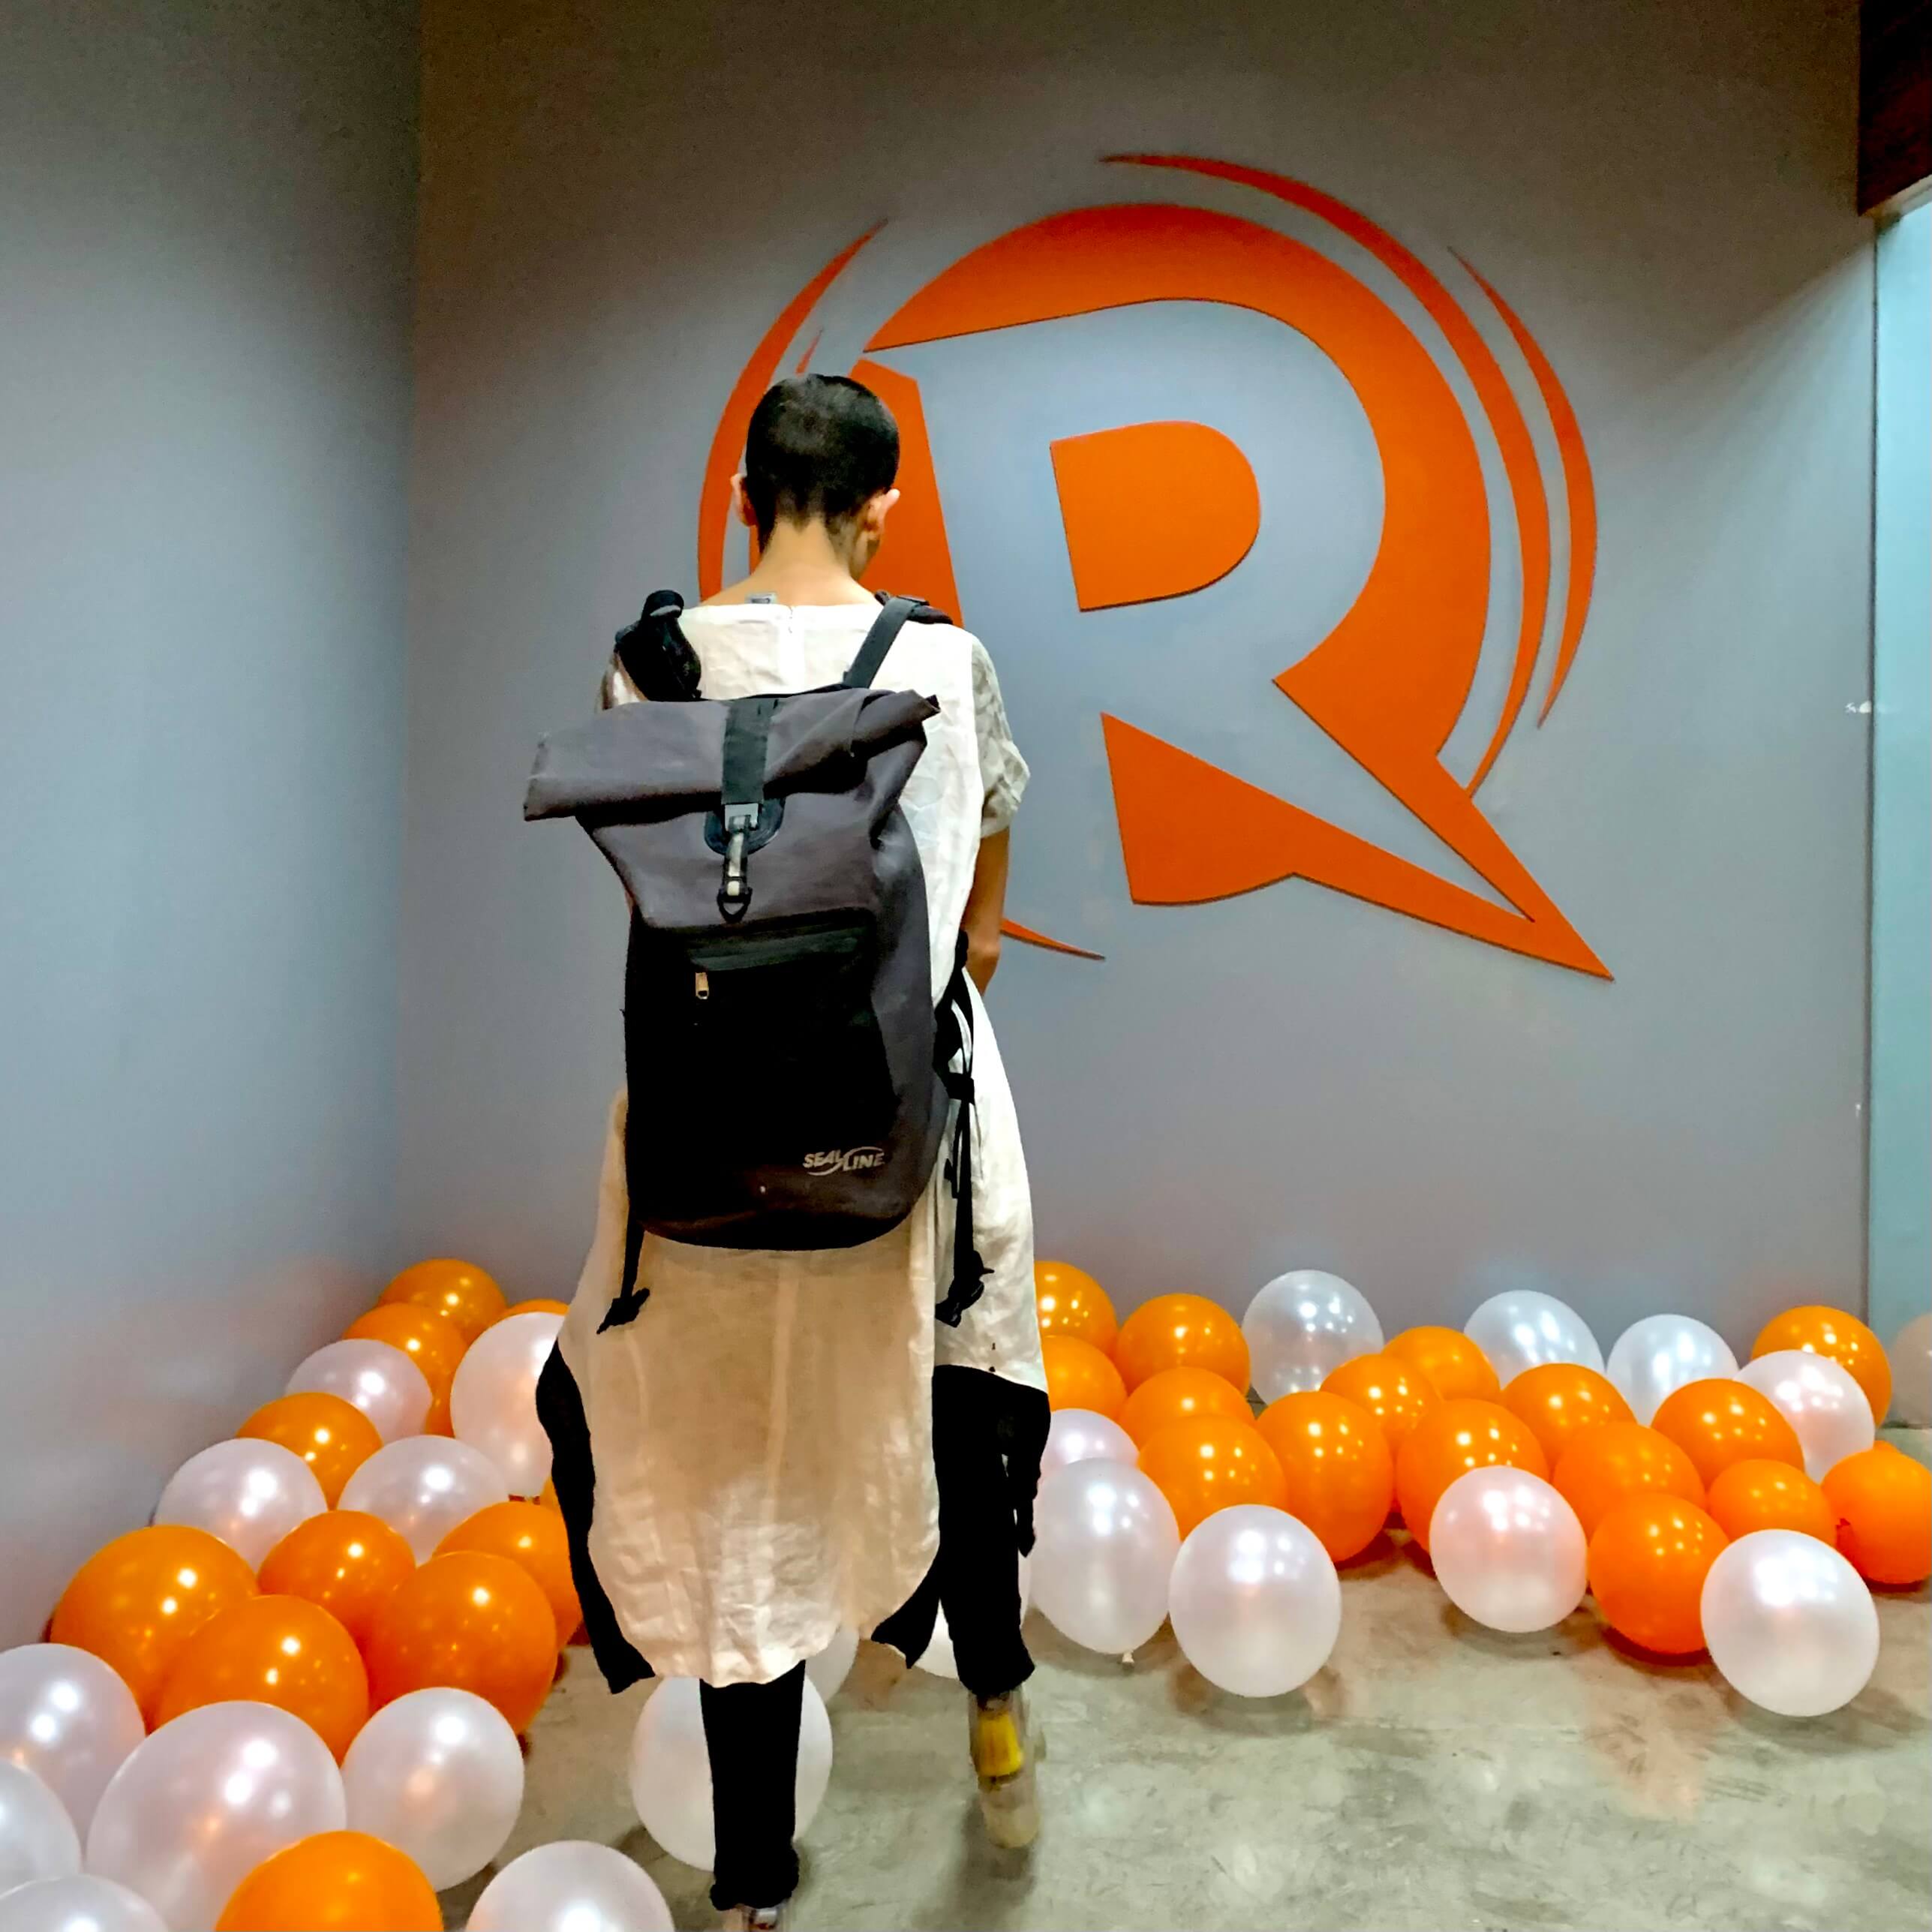 DVXD Director Silvia Gonzalez in front of the Rappler logo outside the entrance to Rappler's office in Manila, Phillipines